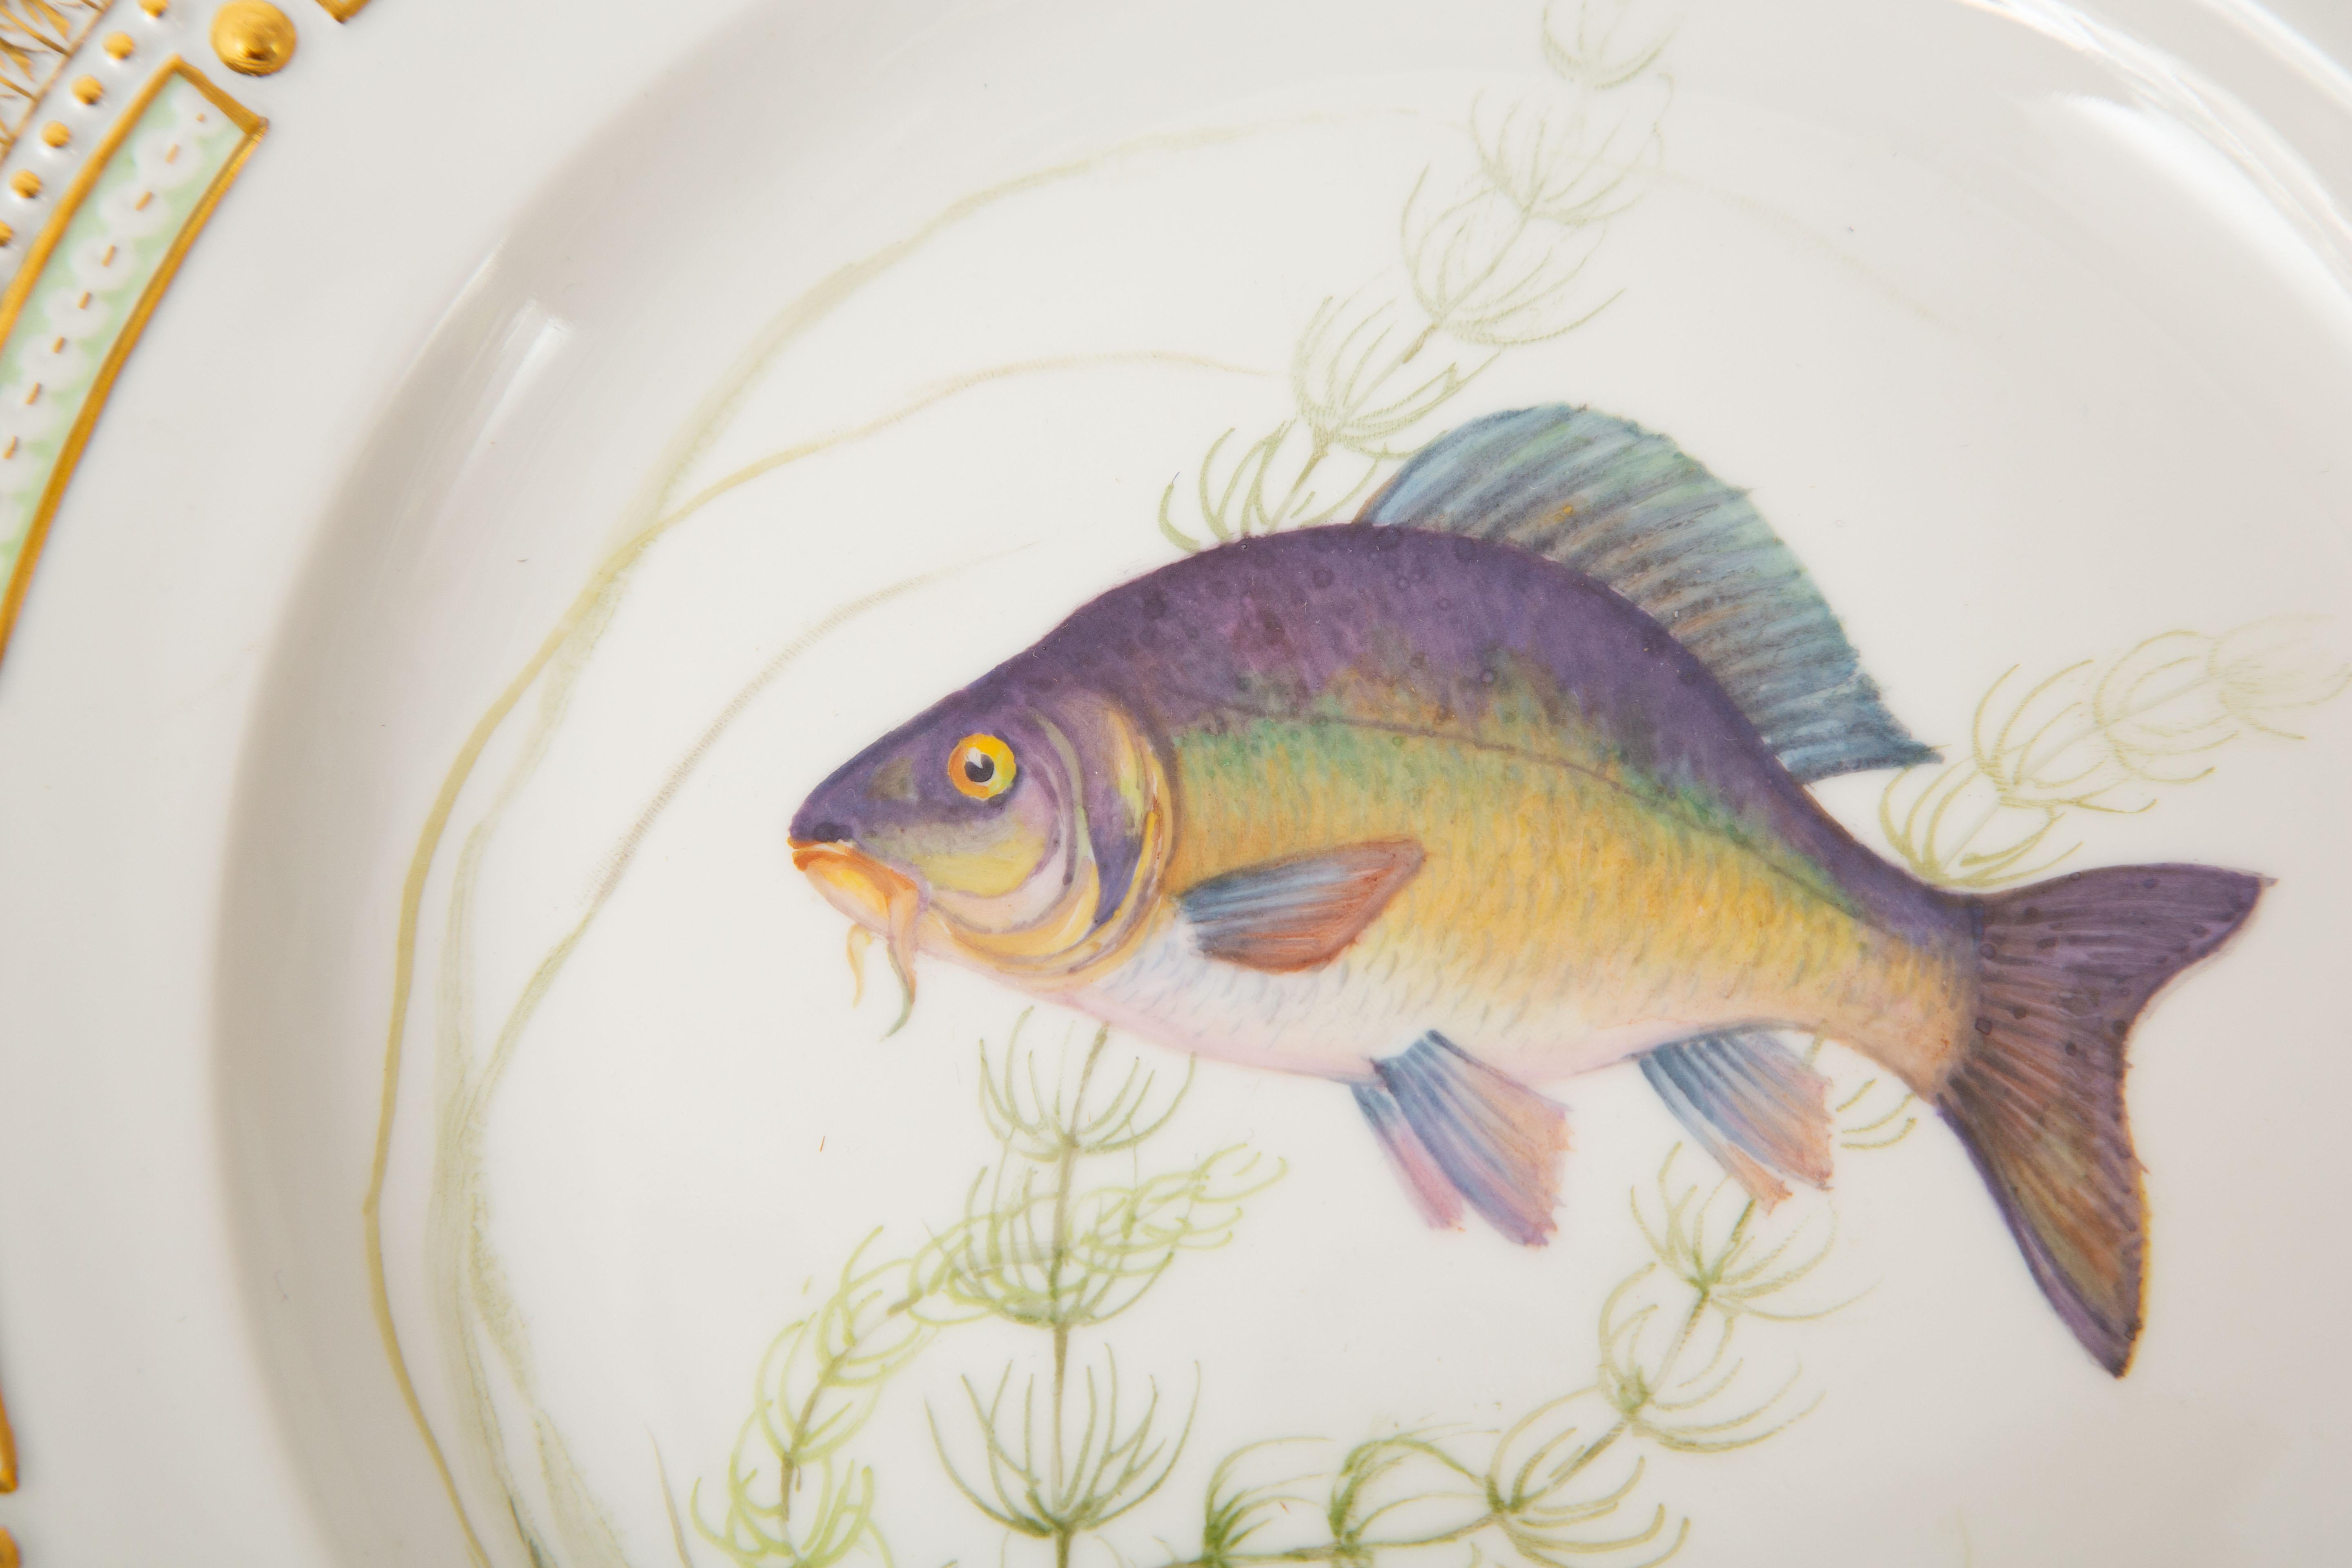 12 Flora Danica Fish Plates, Vintage and Vibrantly Painted, Royal Copenhagen For Sale 2